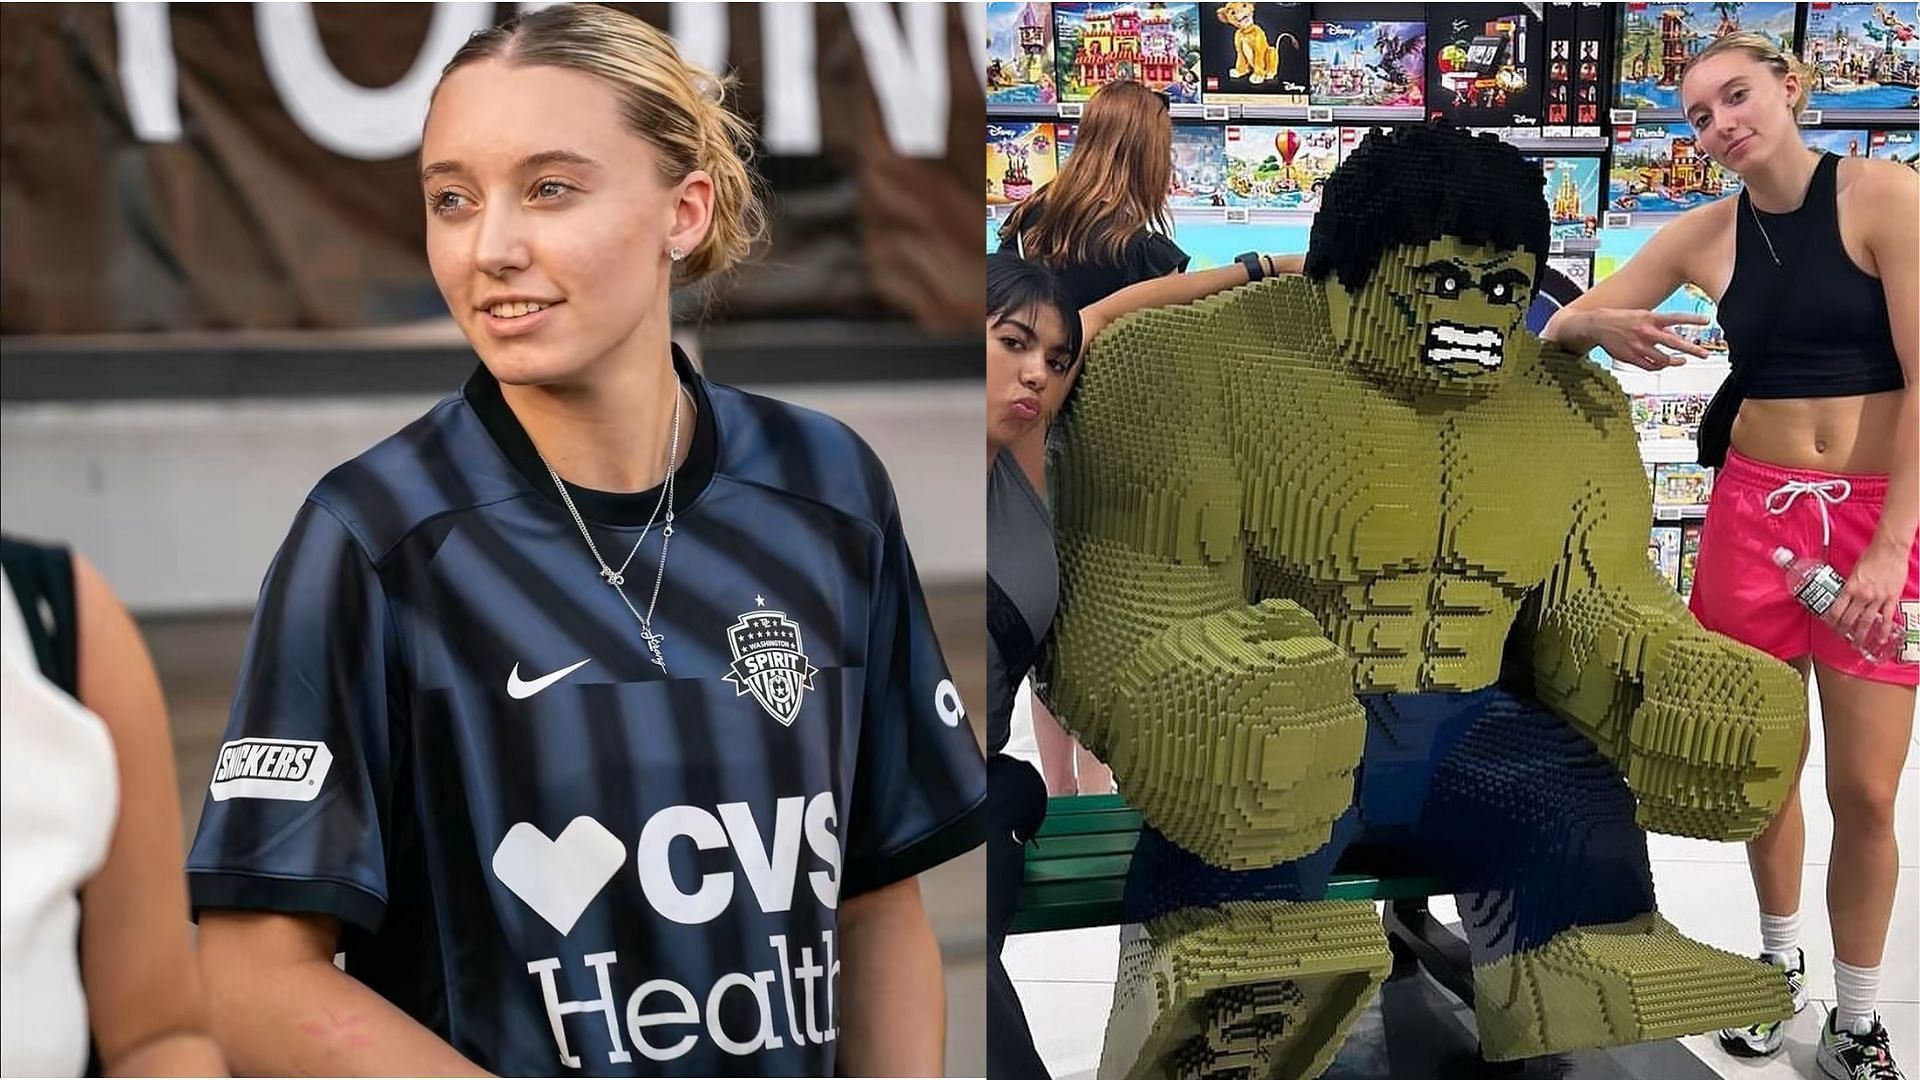 Paige Bueckers stands next a Lego figure of Hulk